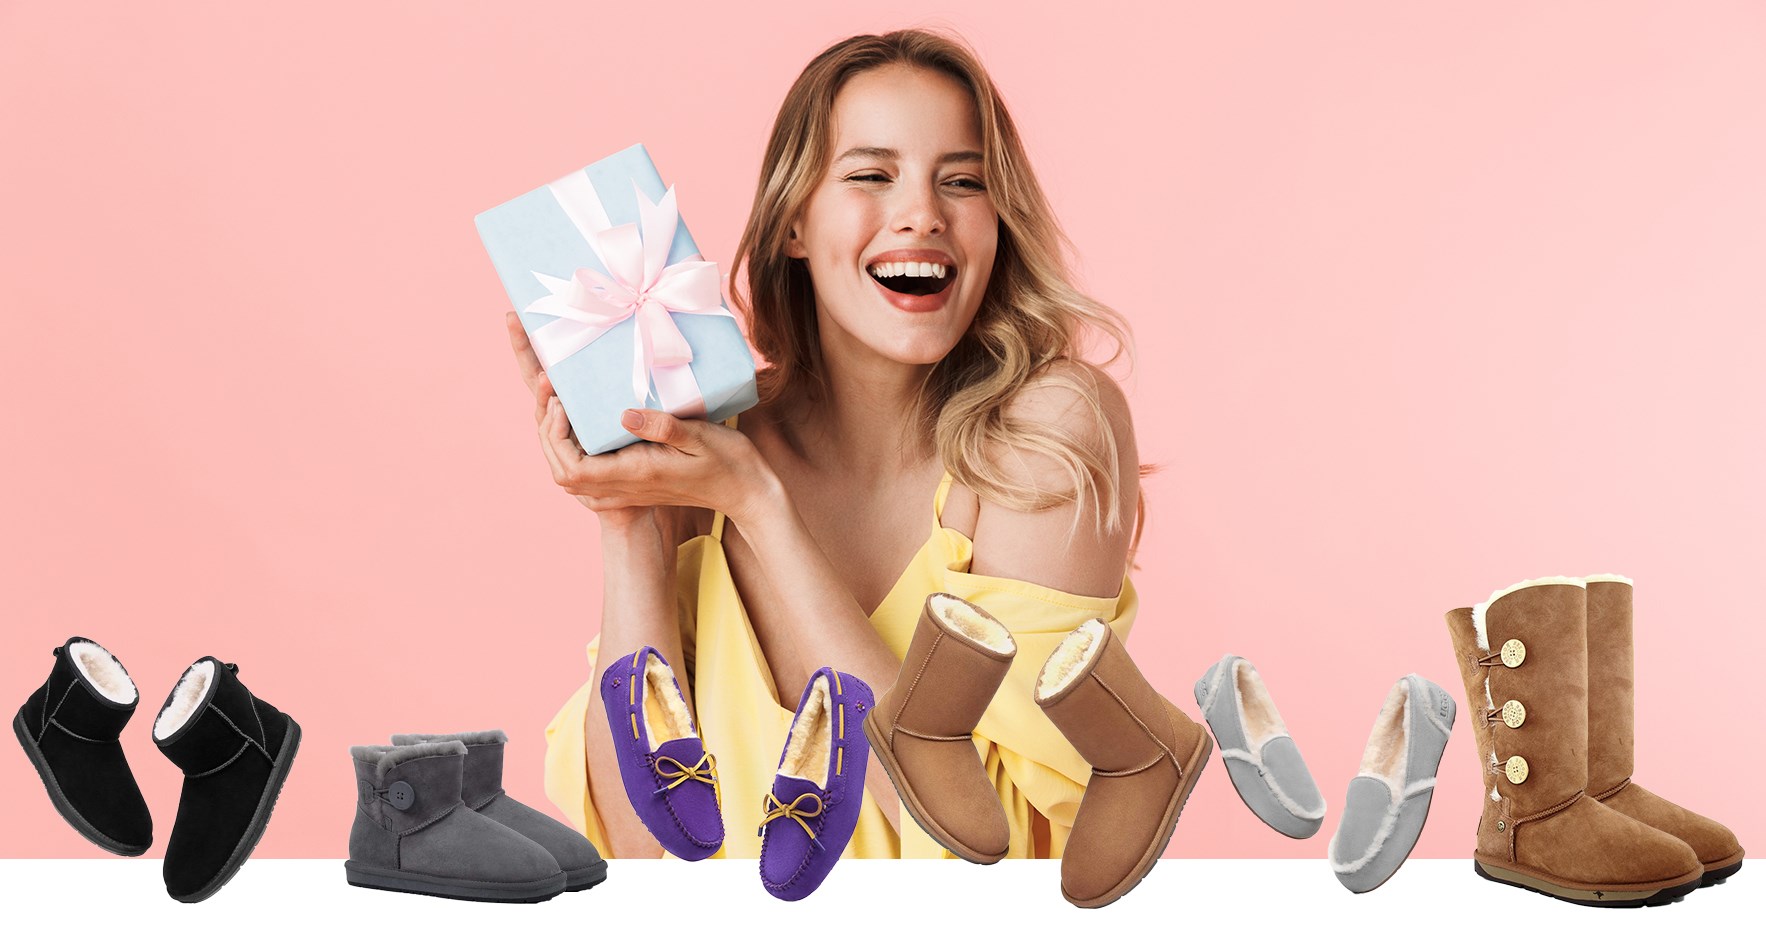 Why UGG Direct is the Best Way to Shop for Your UGG Boots